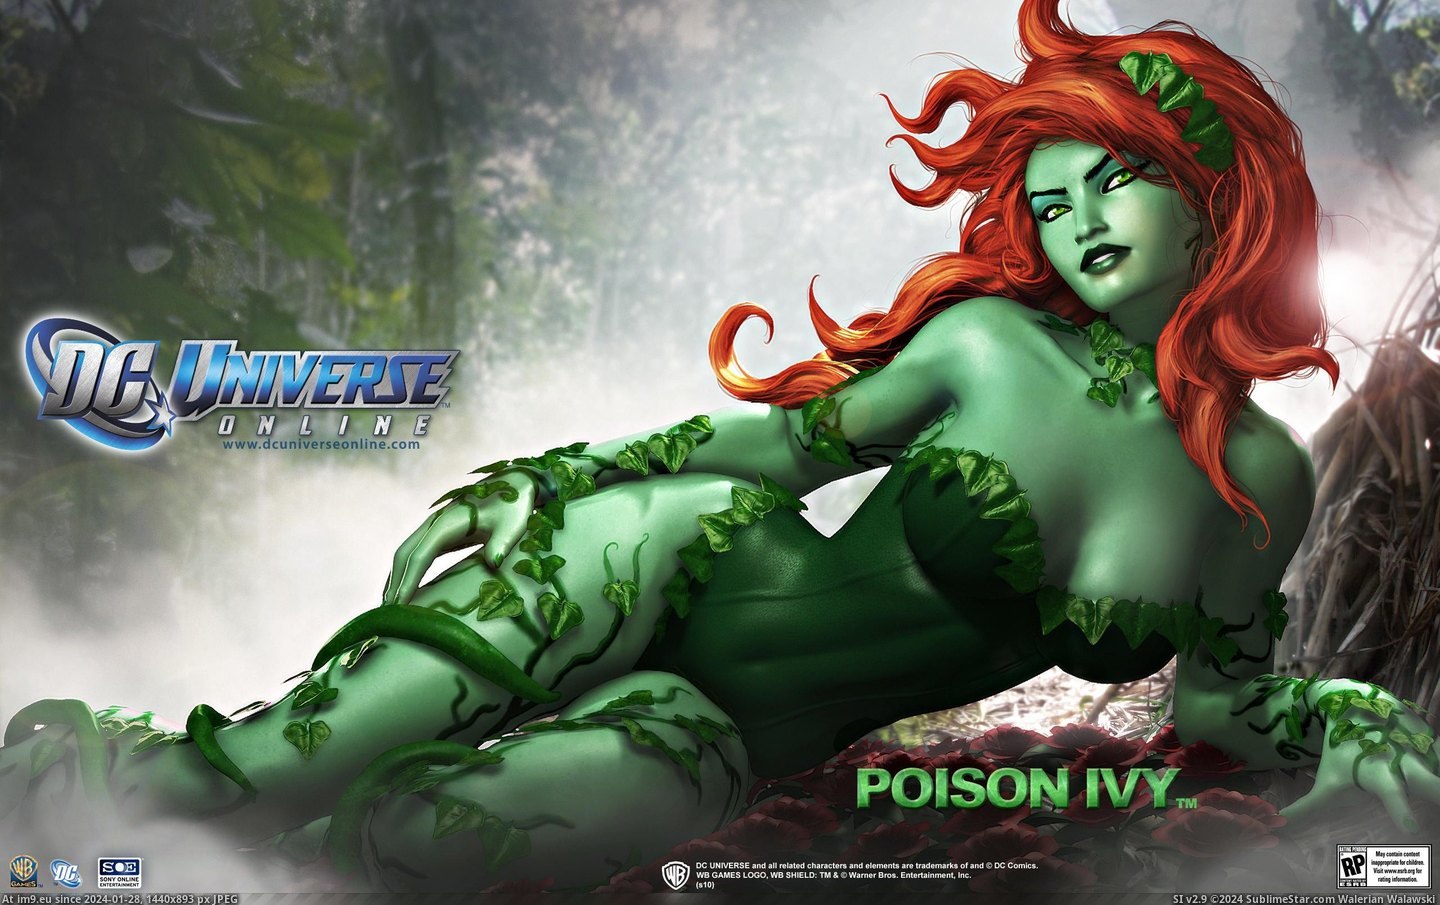 #Wallpaper #Wide #Universe #Poison #Ivy Dc Universe Poison Ivy Wide HD Wallpaper Pic. (Obraz z album Unique HD Wallpapers))